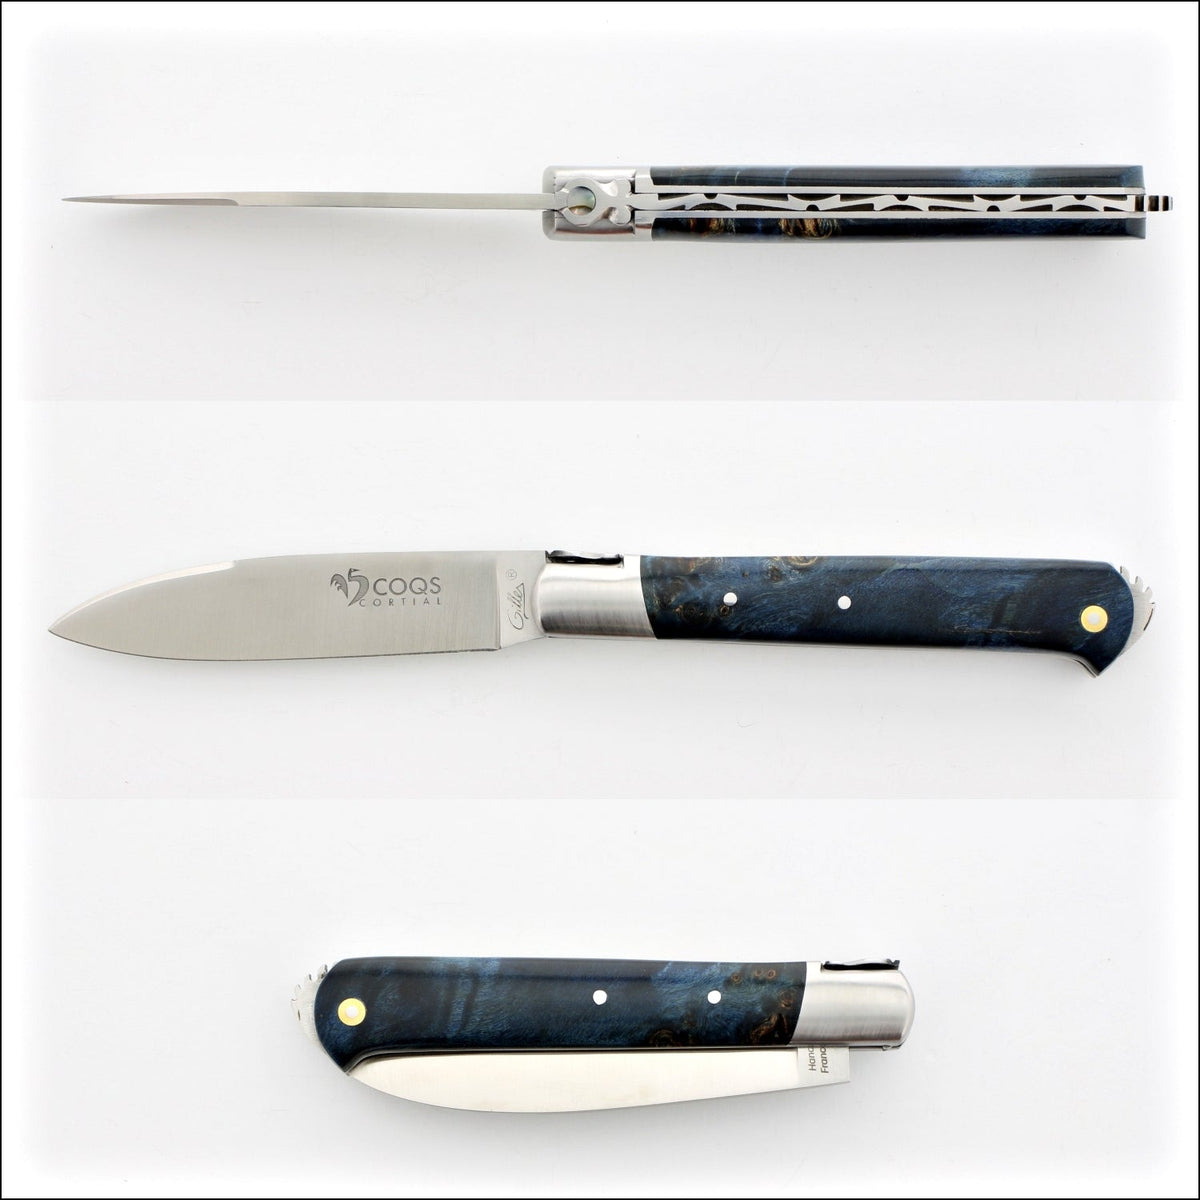 5 Coqs Pocket Knife - Blue Stabilized Poplar Burl &amp; Mother of Pearl Inlay